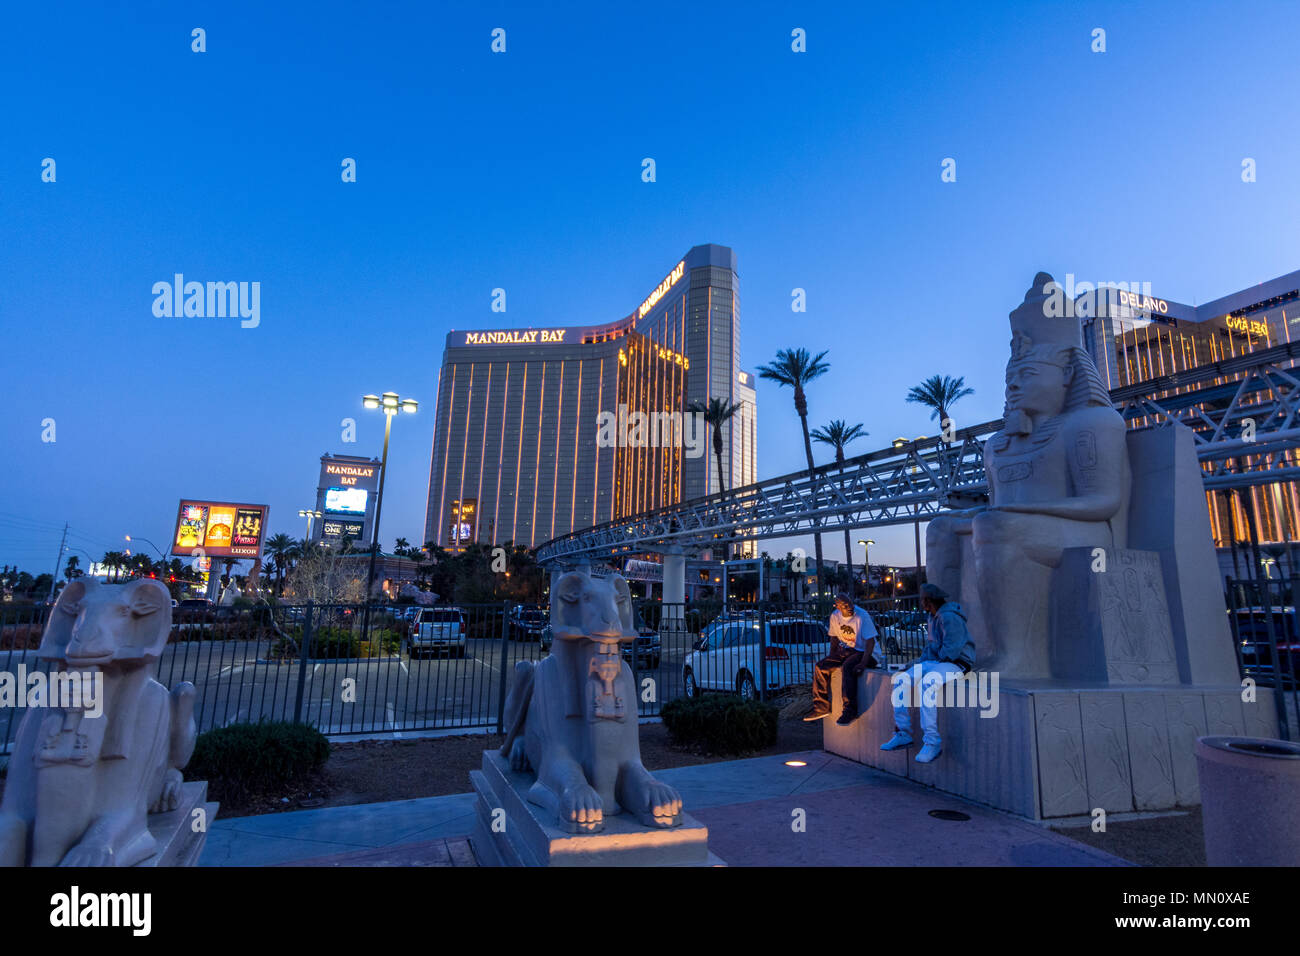 Las Vegas, US - April 28, 2018: The famous Mandalay bay hotel in Las vegas as seen at dusk from the Luxor front Stock Photo